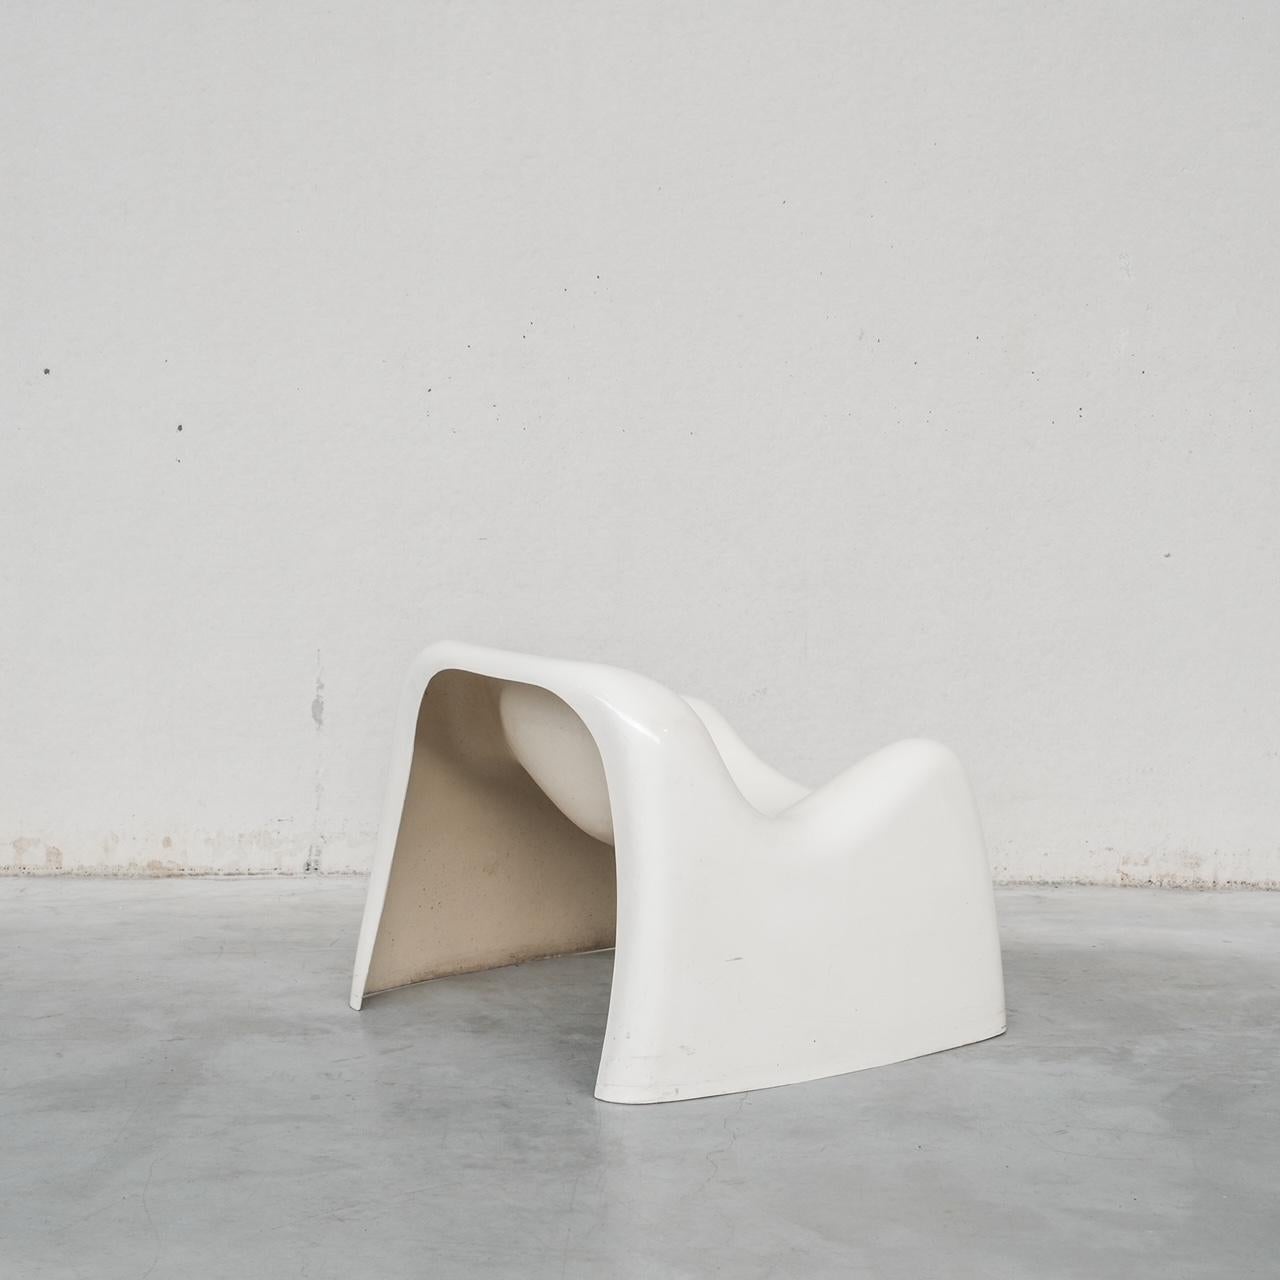 Pair of 'Space Age' Fibreglass 'Toga' Armchairs by Sergio Mazza for Artemide For Sale 7